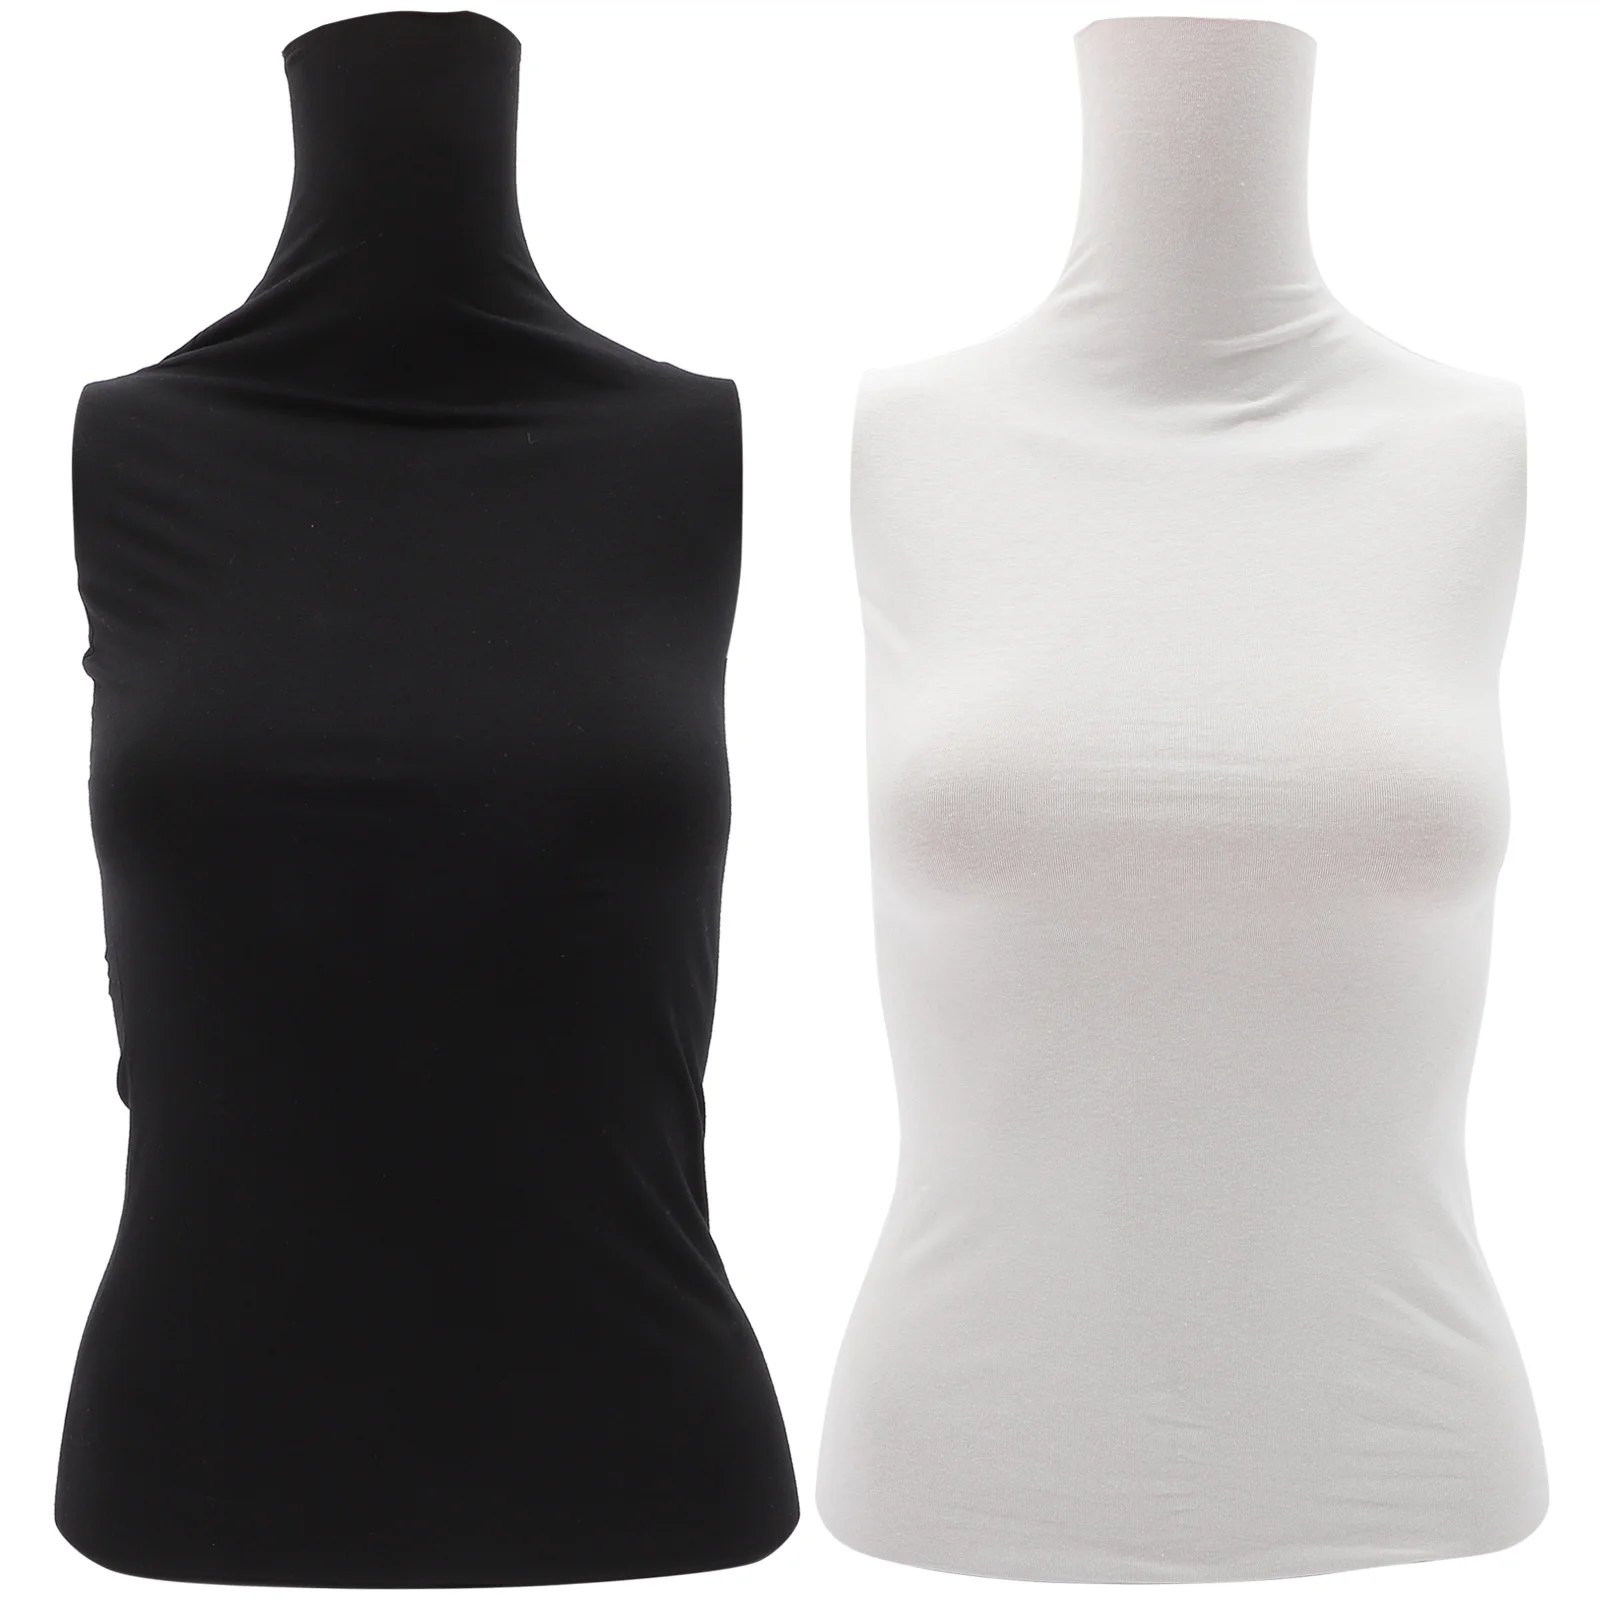 

2Pcs Dummy Upper Body Cotton Cover Durable Mannequin Body Overlay Dummy Prop